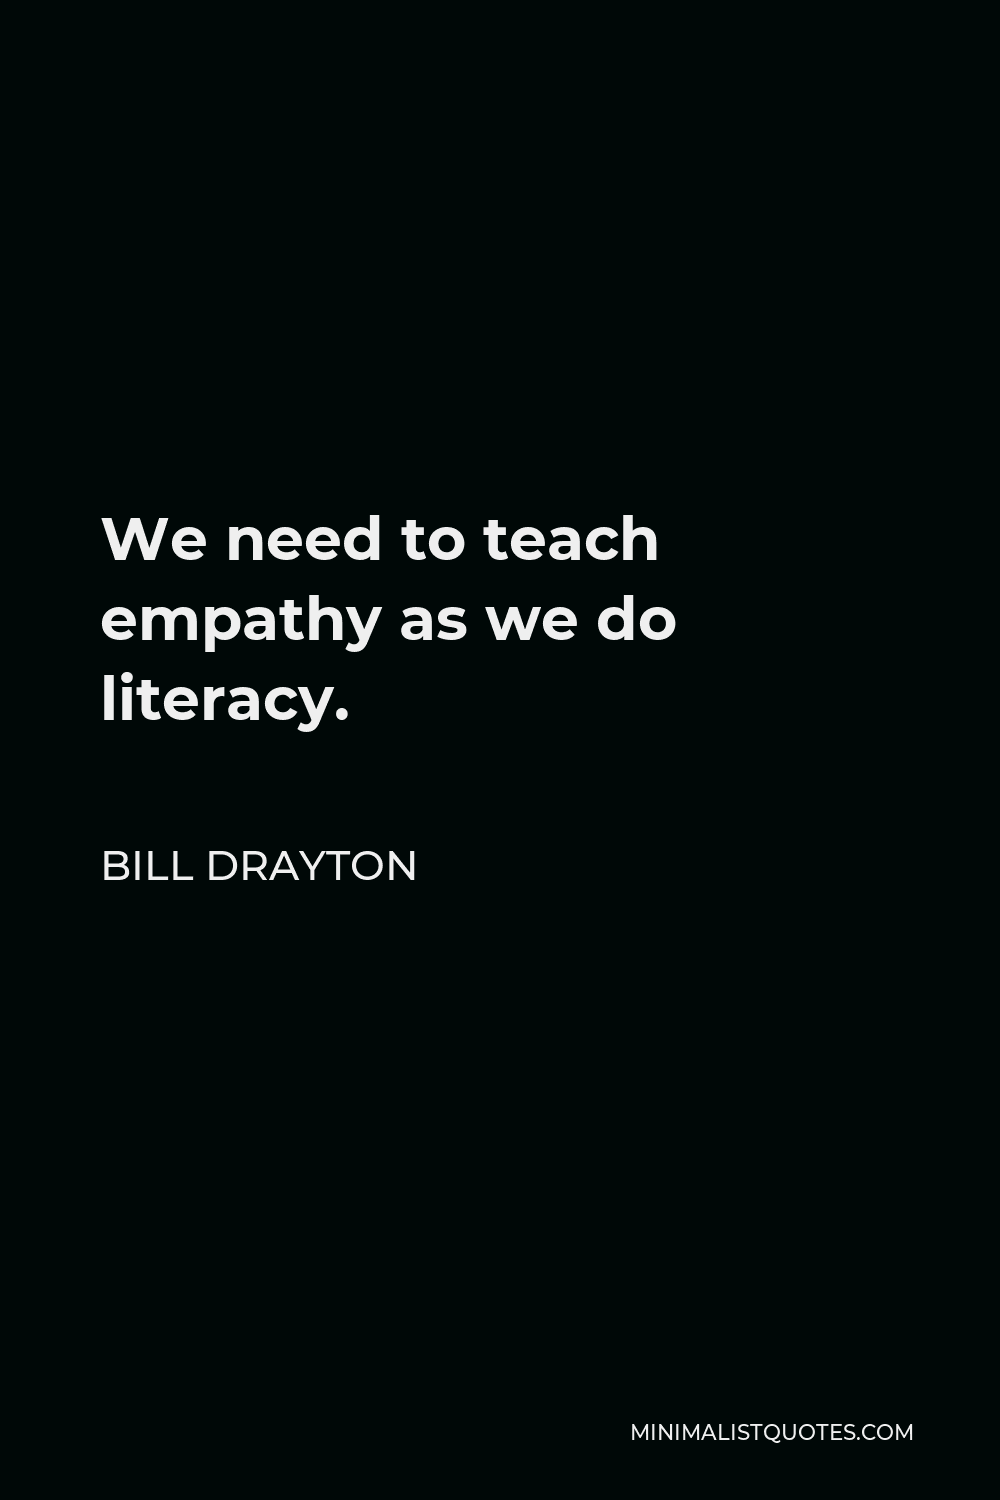 Bill Drayton Quote - We need to teach empathy as we do literacy.